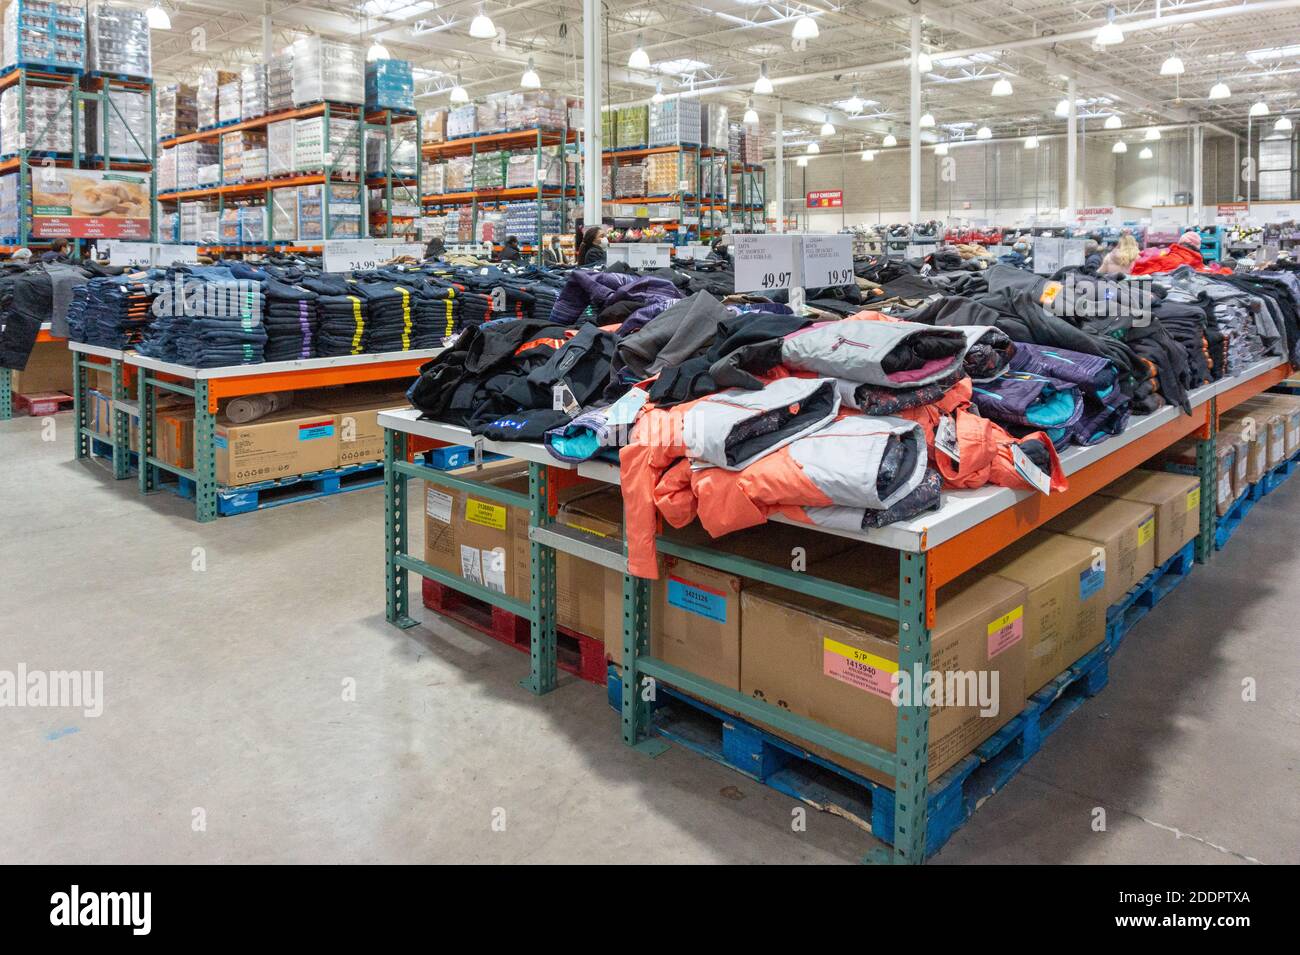 The clothing department in a Costco wholesale retailer Stock Photo